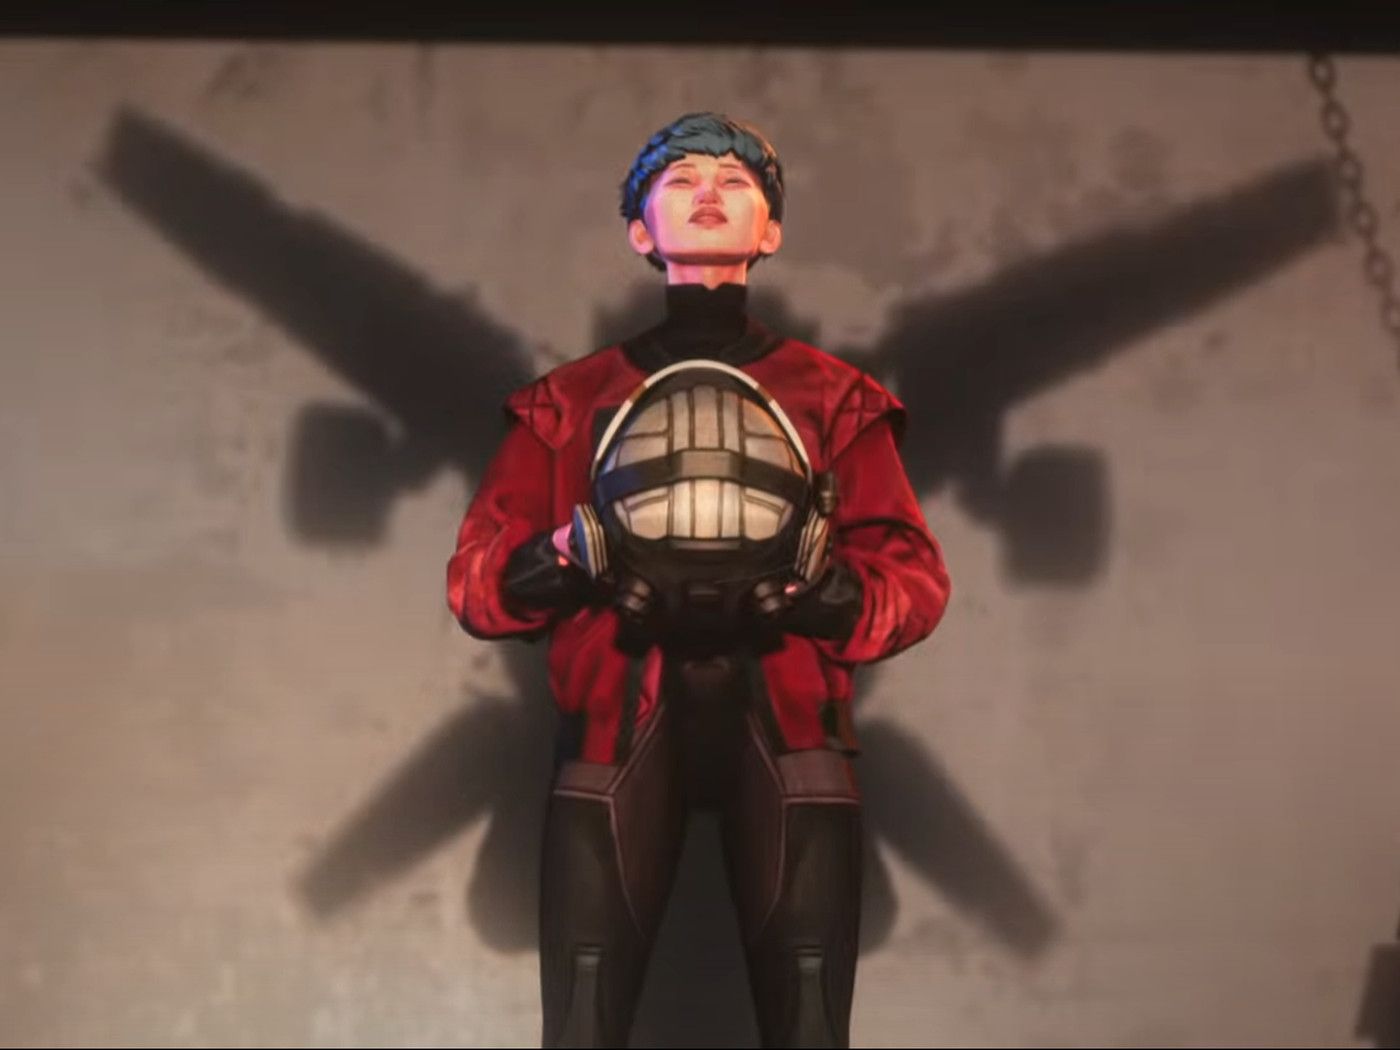 Apex Legends' short shows off the game's new character, Valkyrie